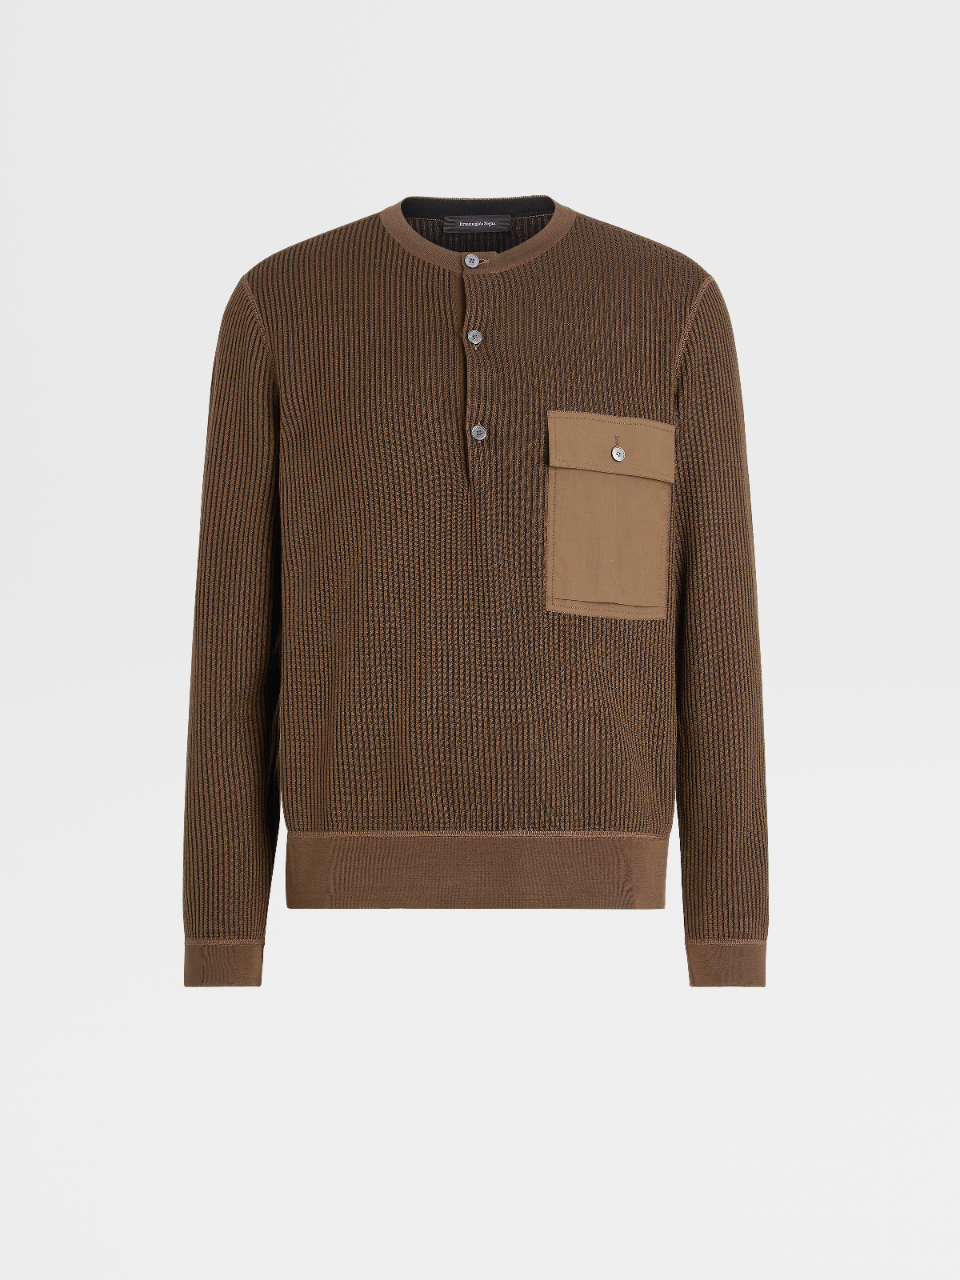 Brown and Black Cotton and Silk Knit Henley Shirt